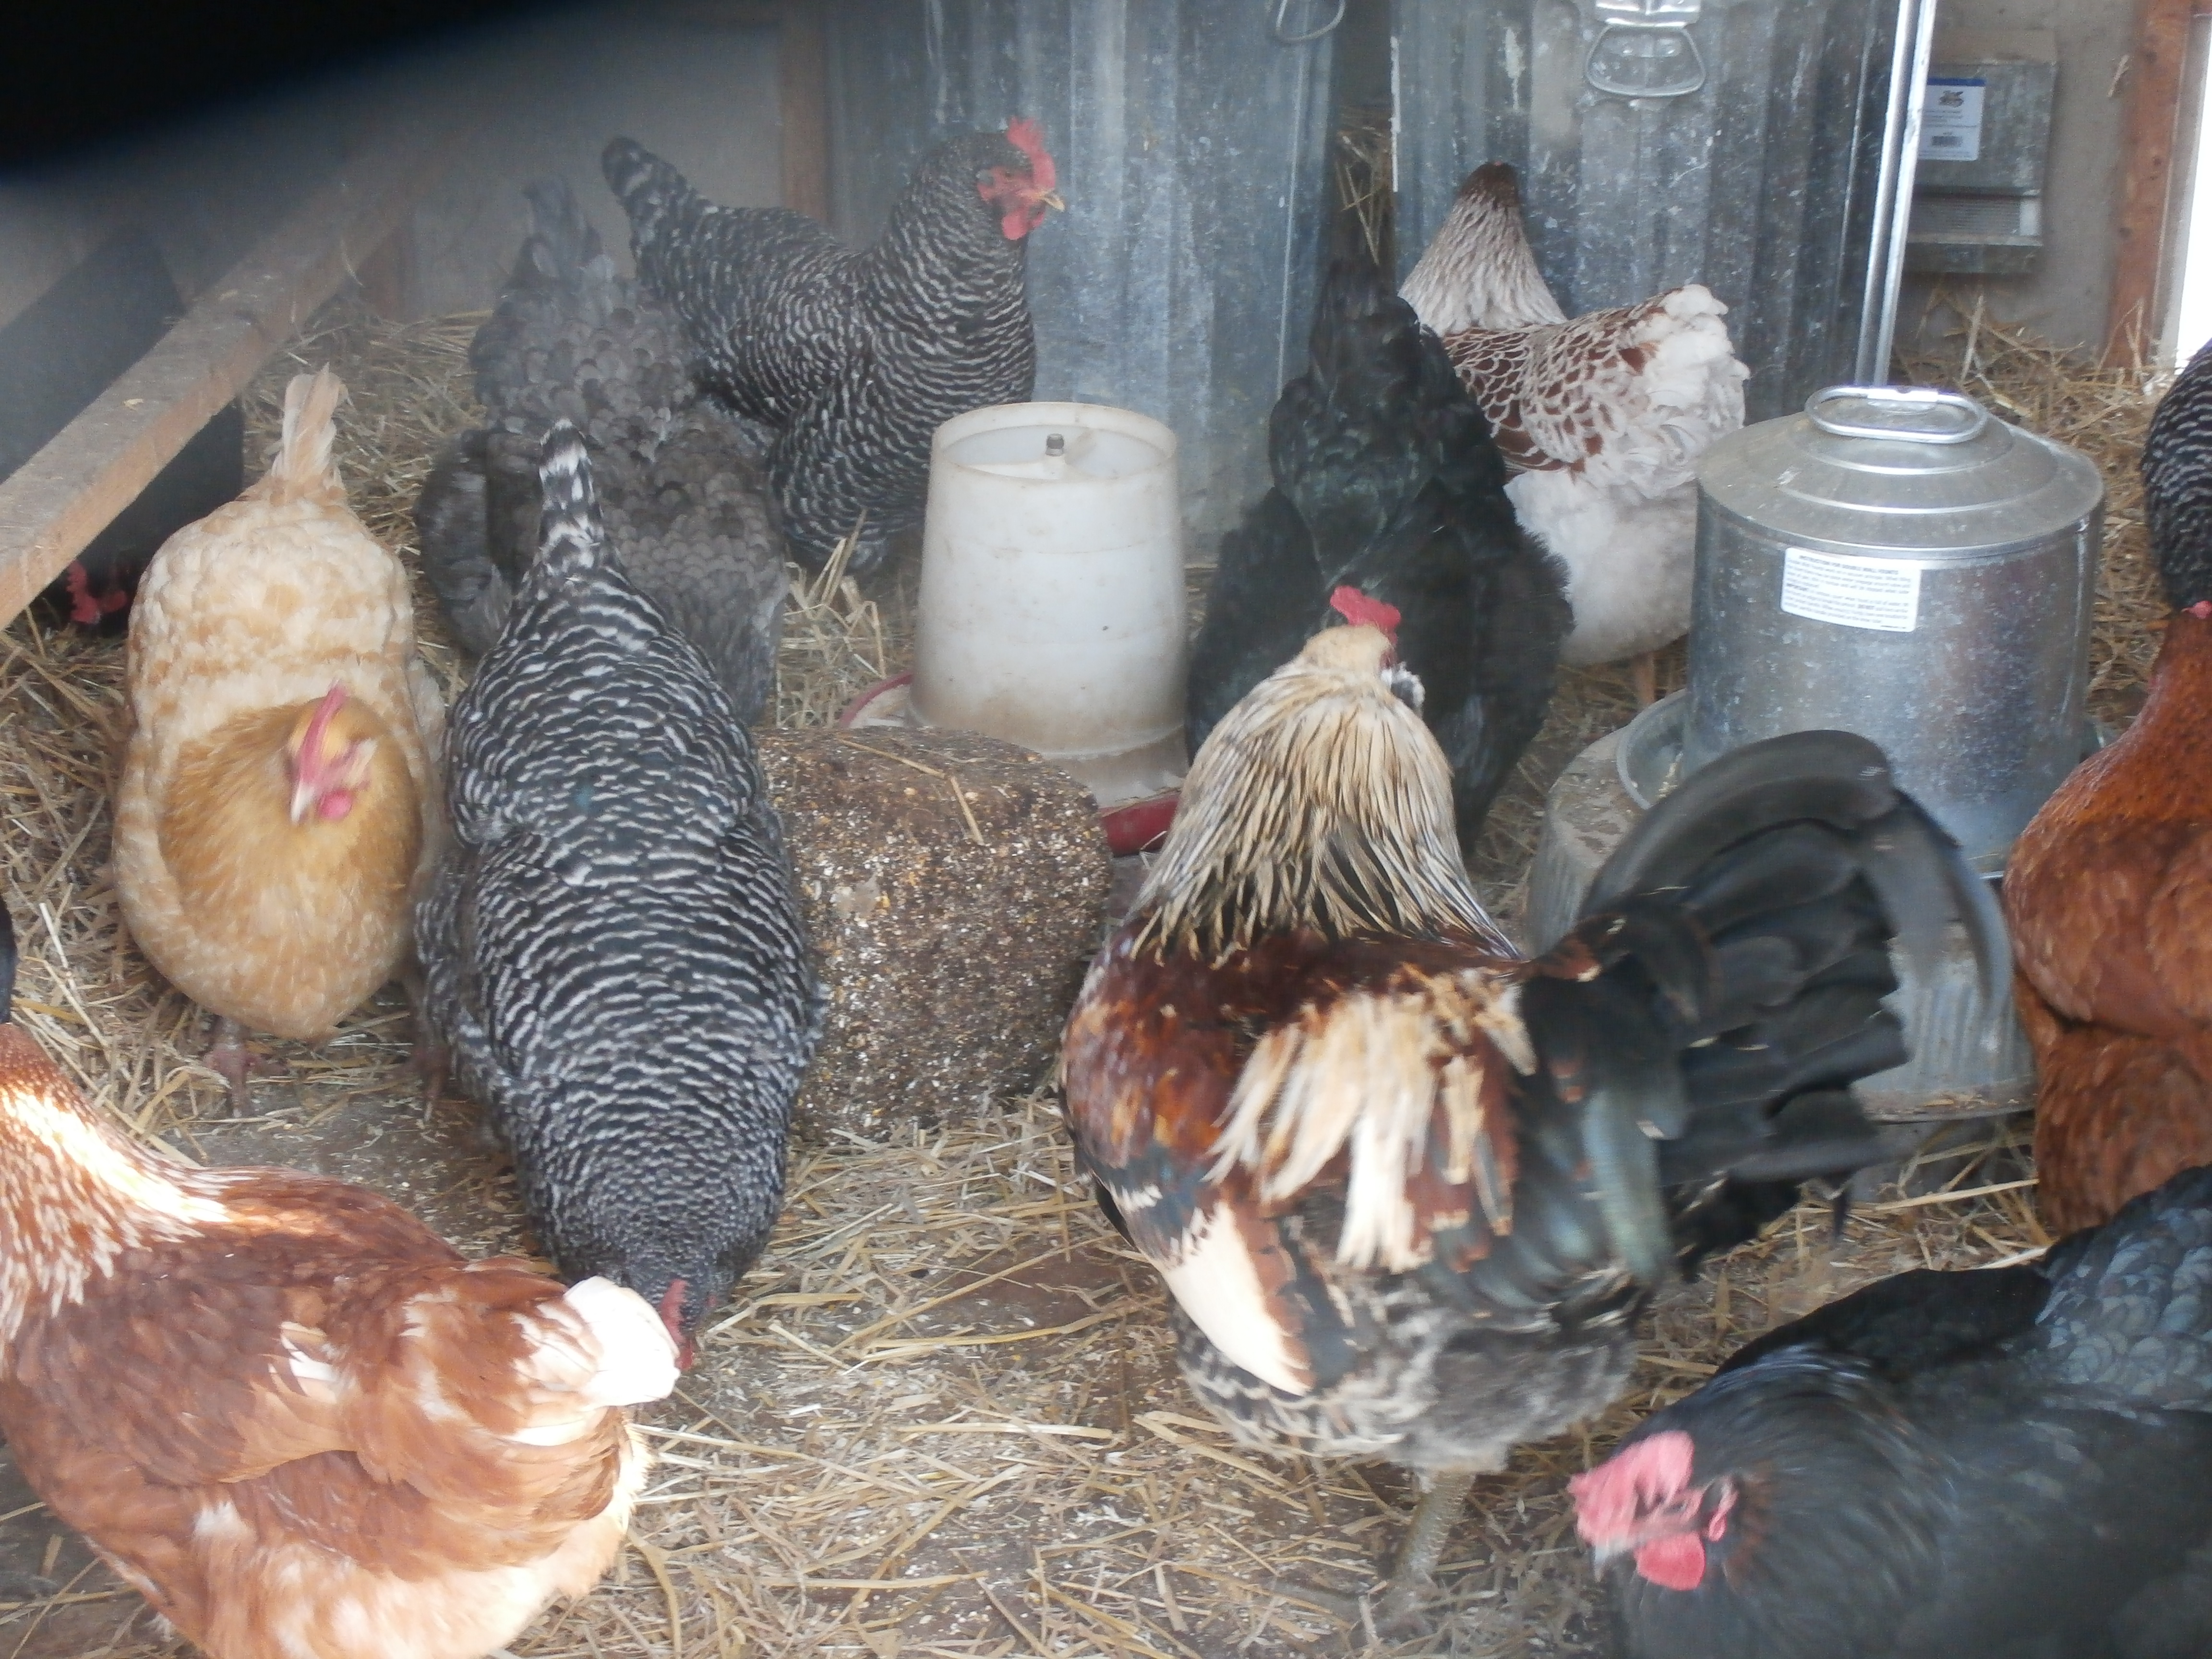 A day in the chicken coop with Harley the rooster.